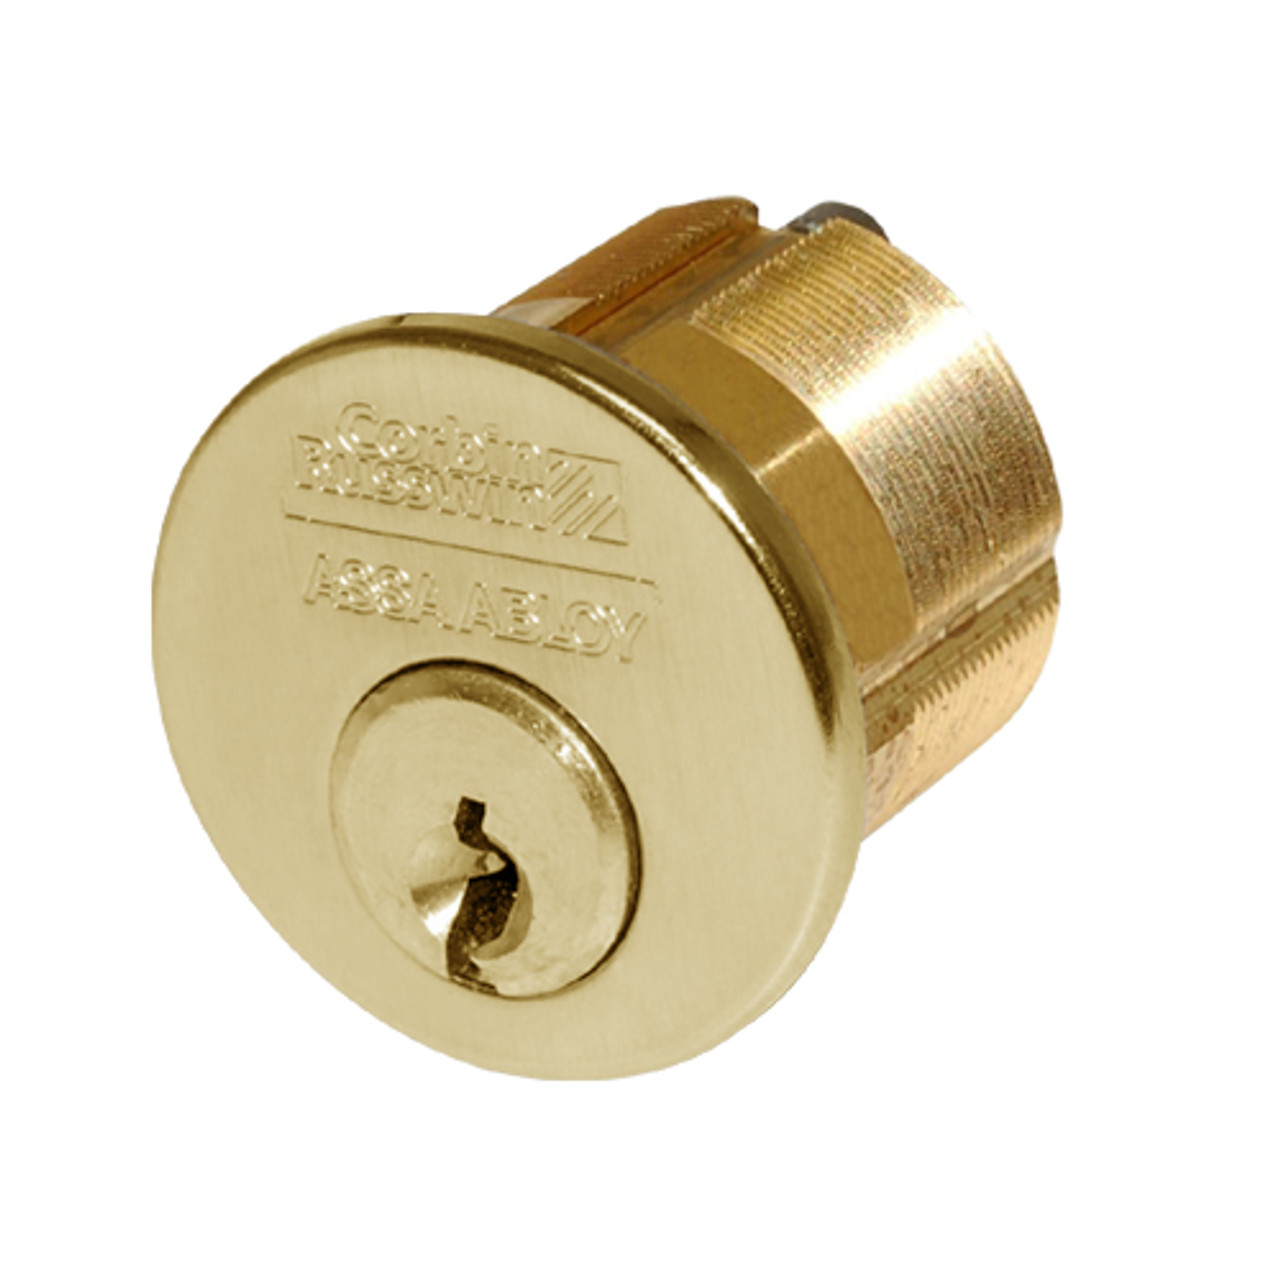 CR1000-134-A01-6-D2-605 Corbin Conventional Mortise Cylinder for Mortise Lock and DL3000 Deadlocks with Cloverleaf Cam in Bright Brass Finish